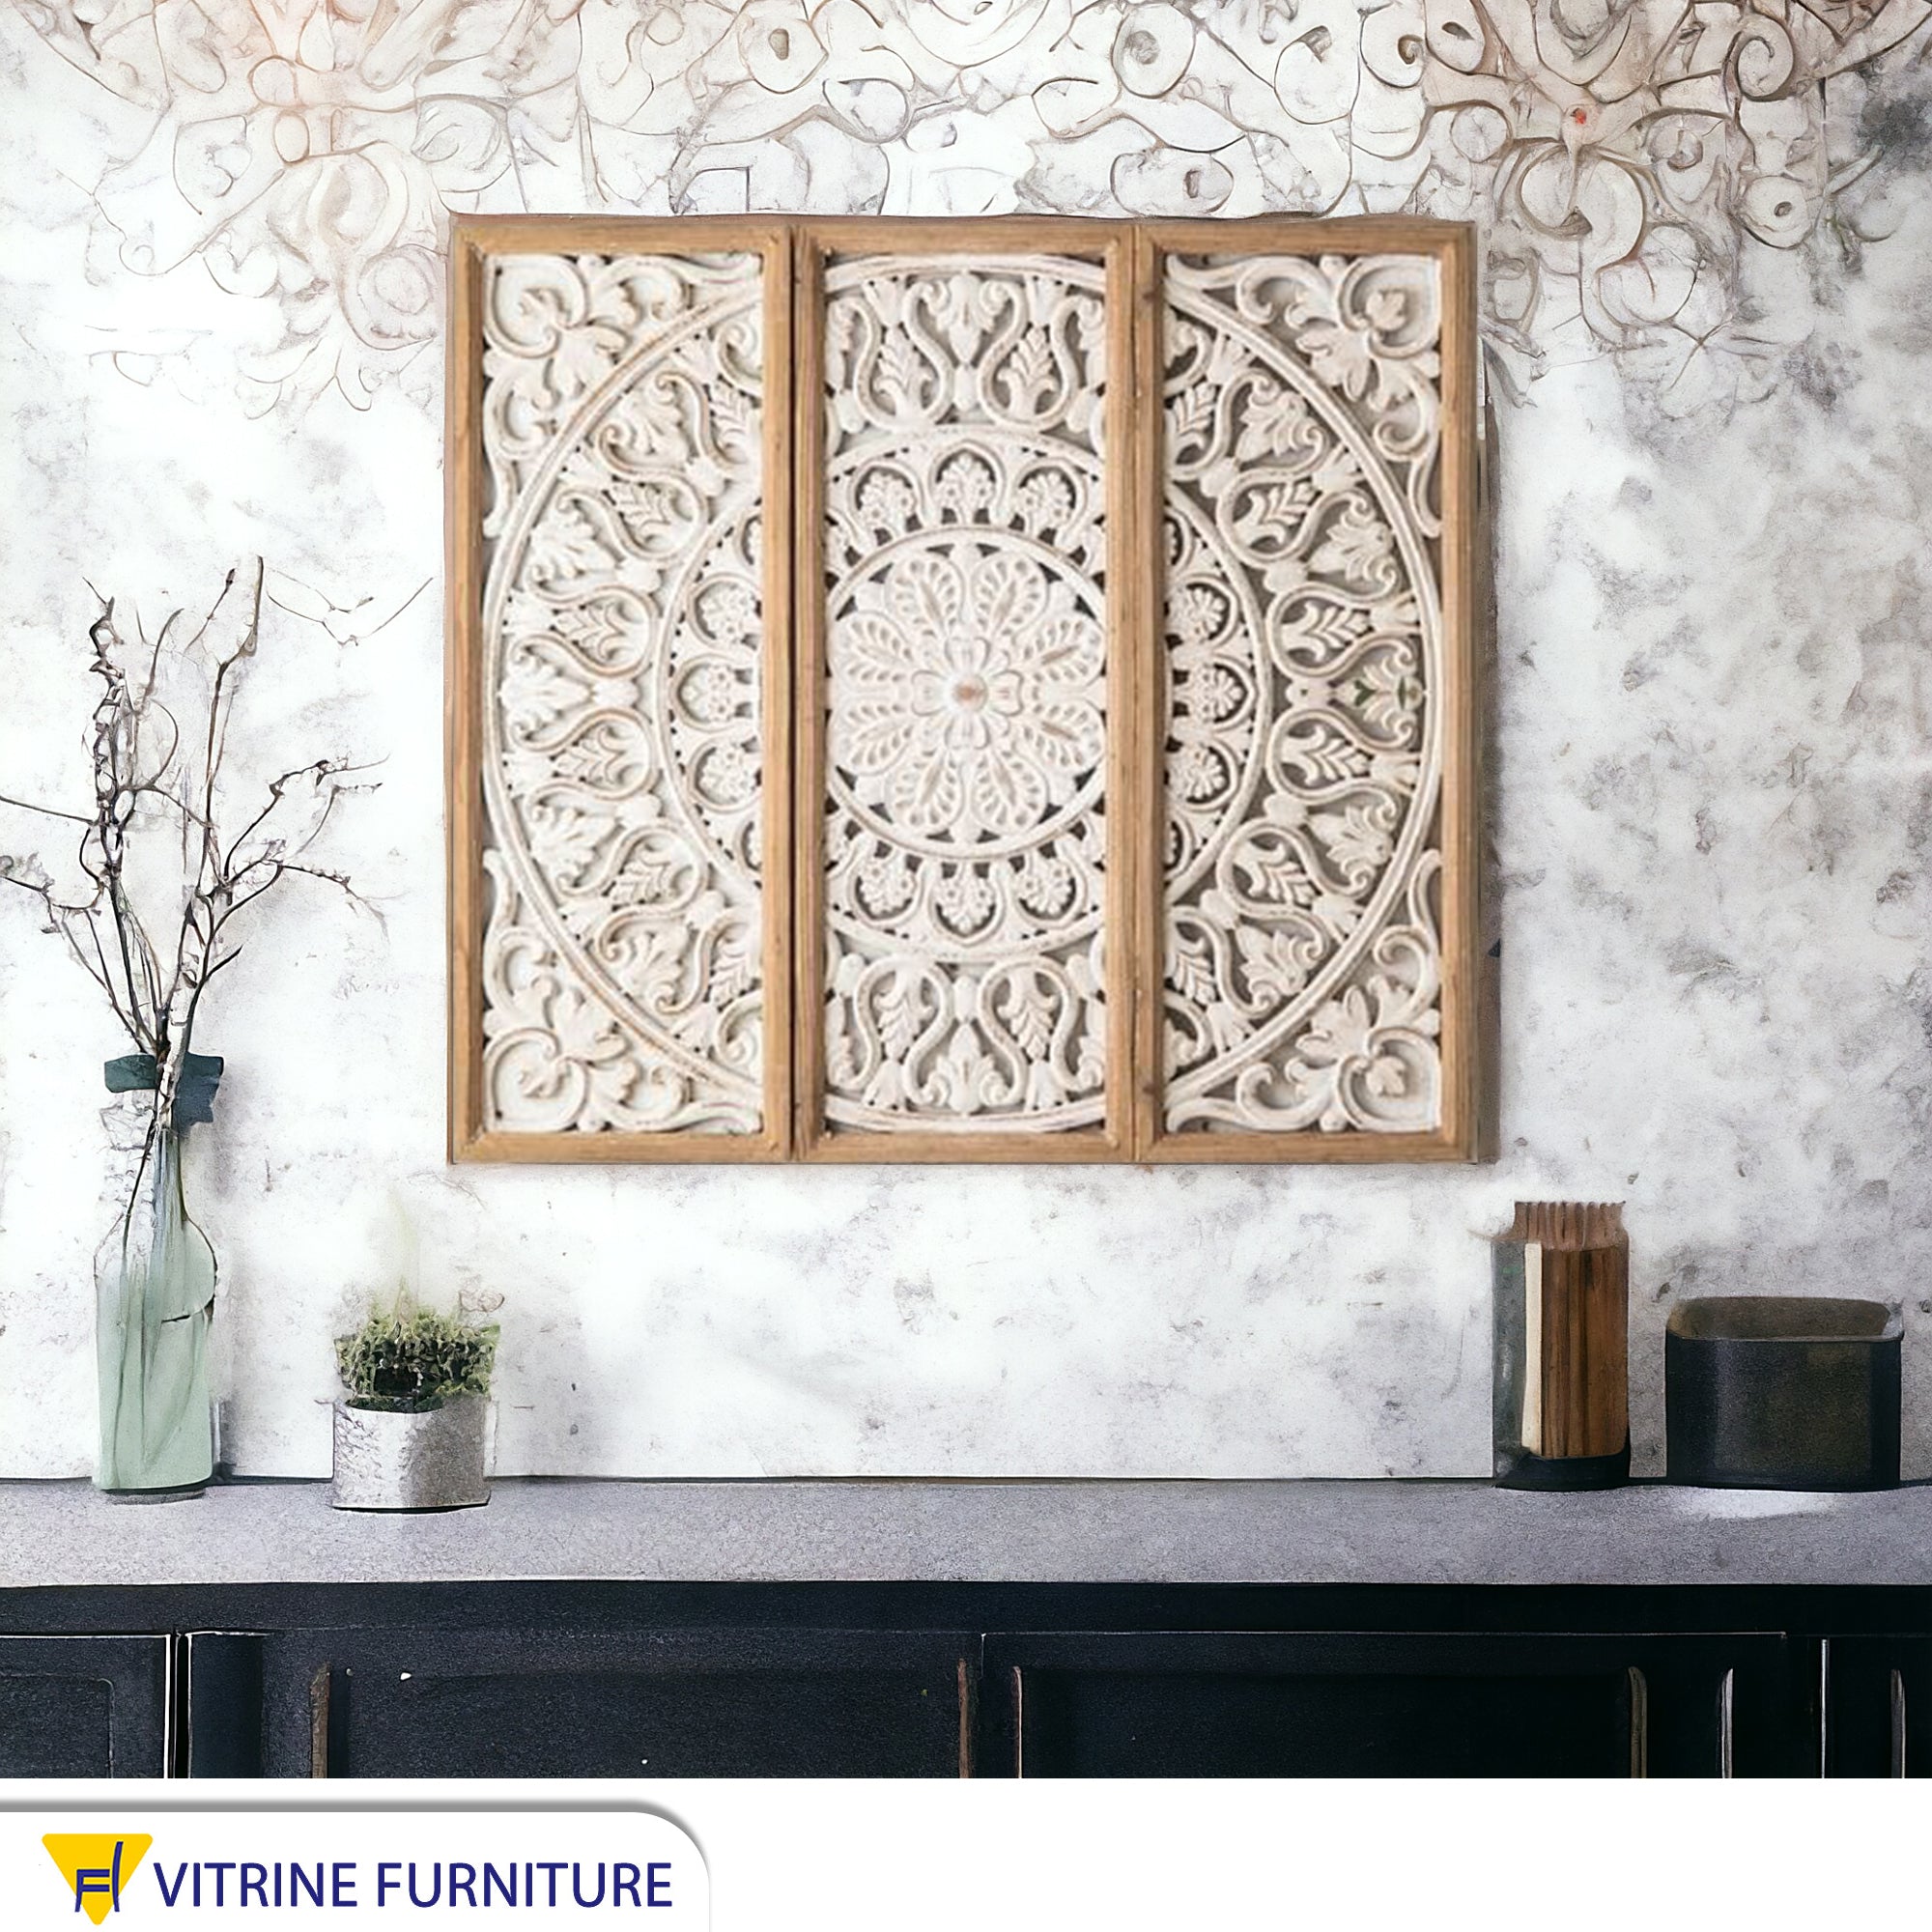 A wall panel carved in the shape of a three-dimensional flower